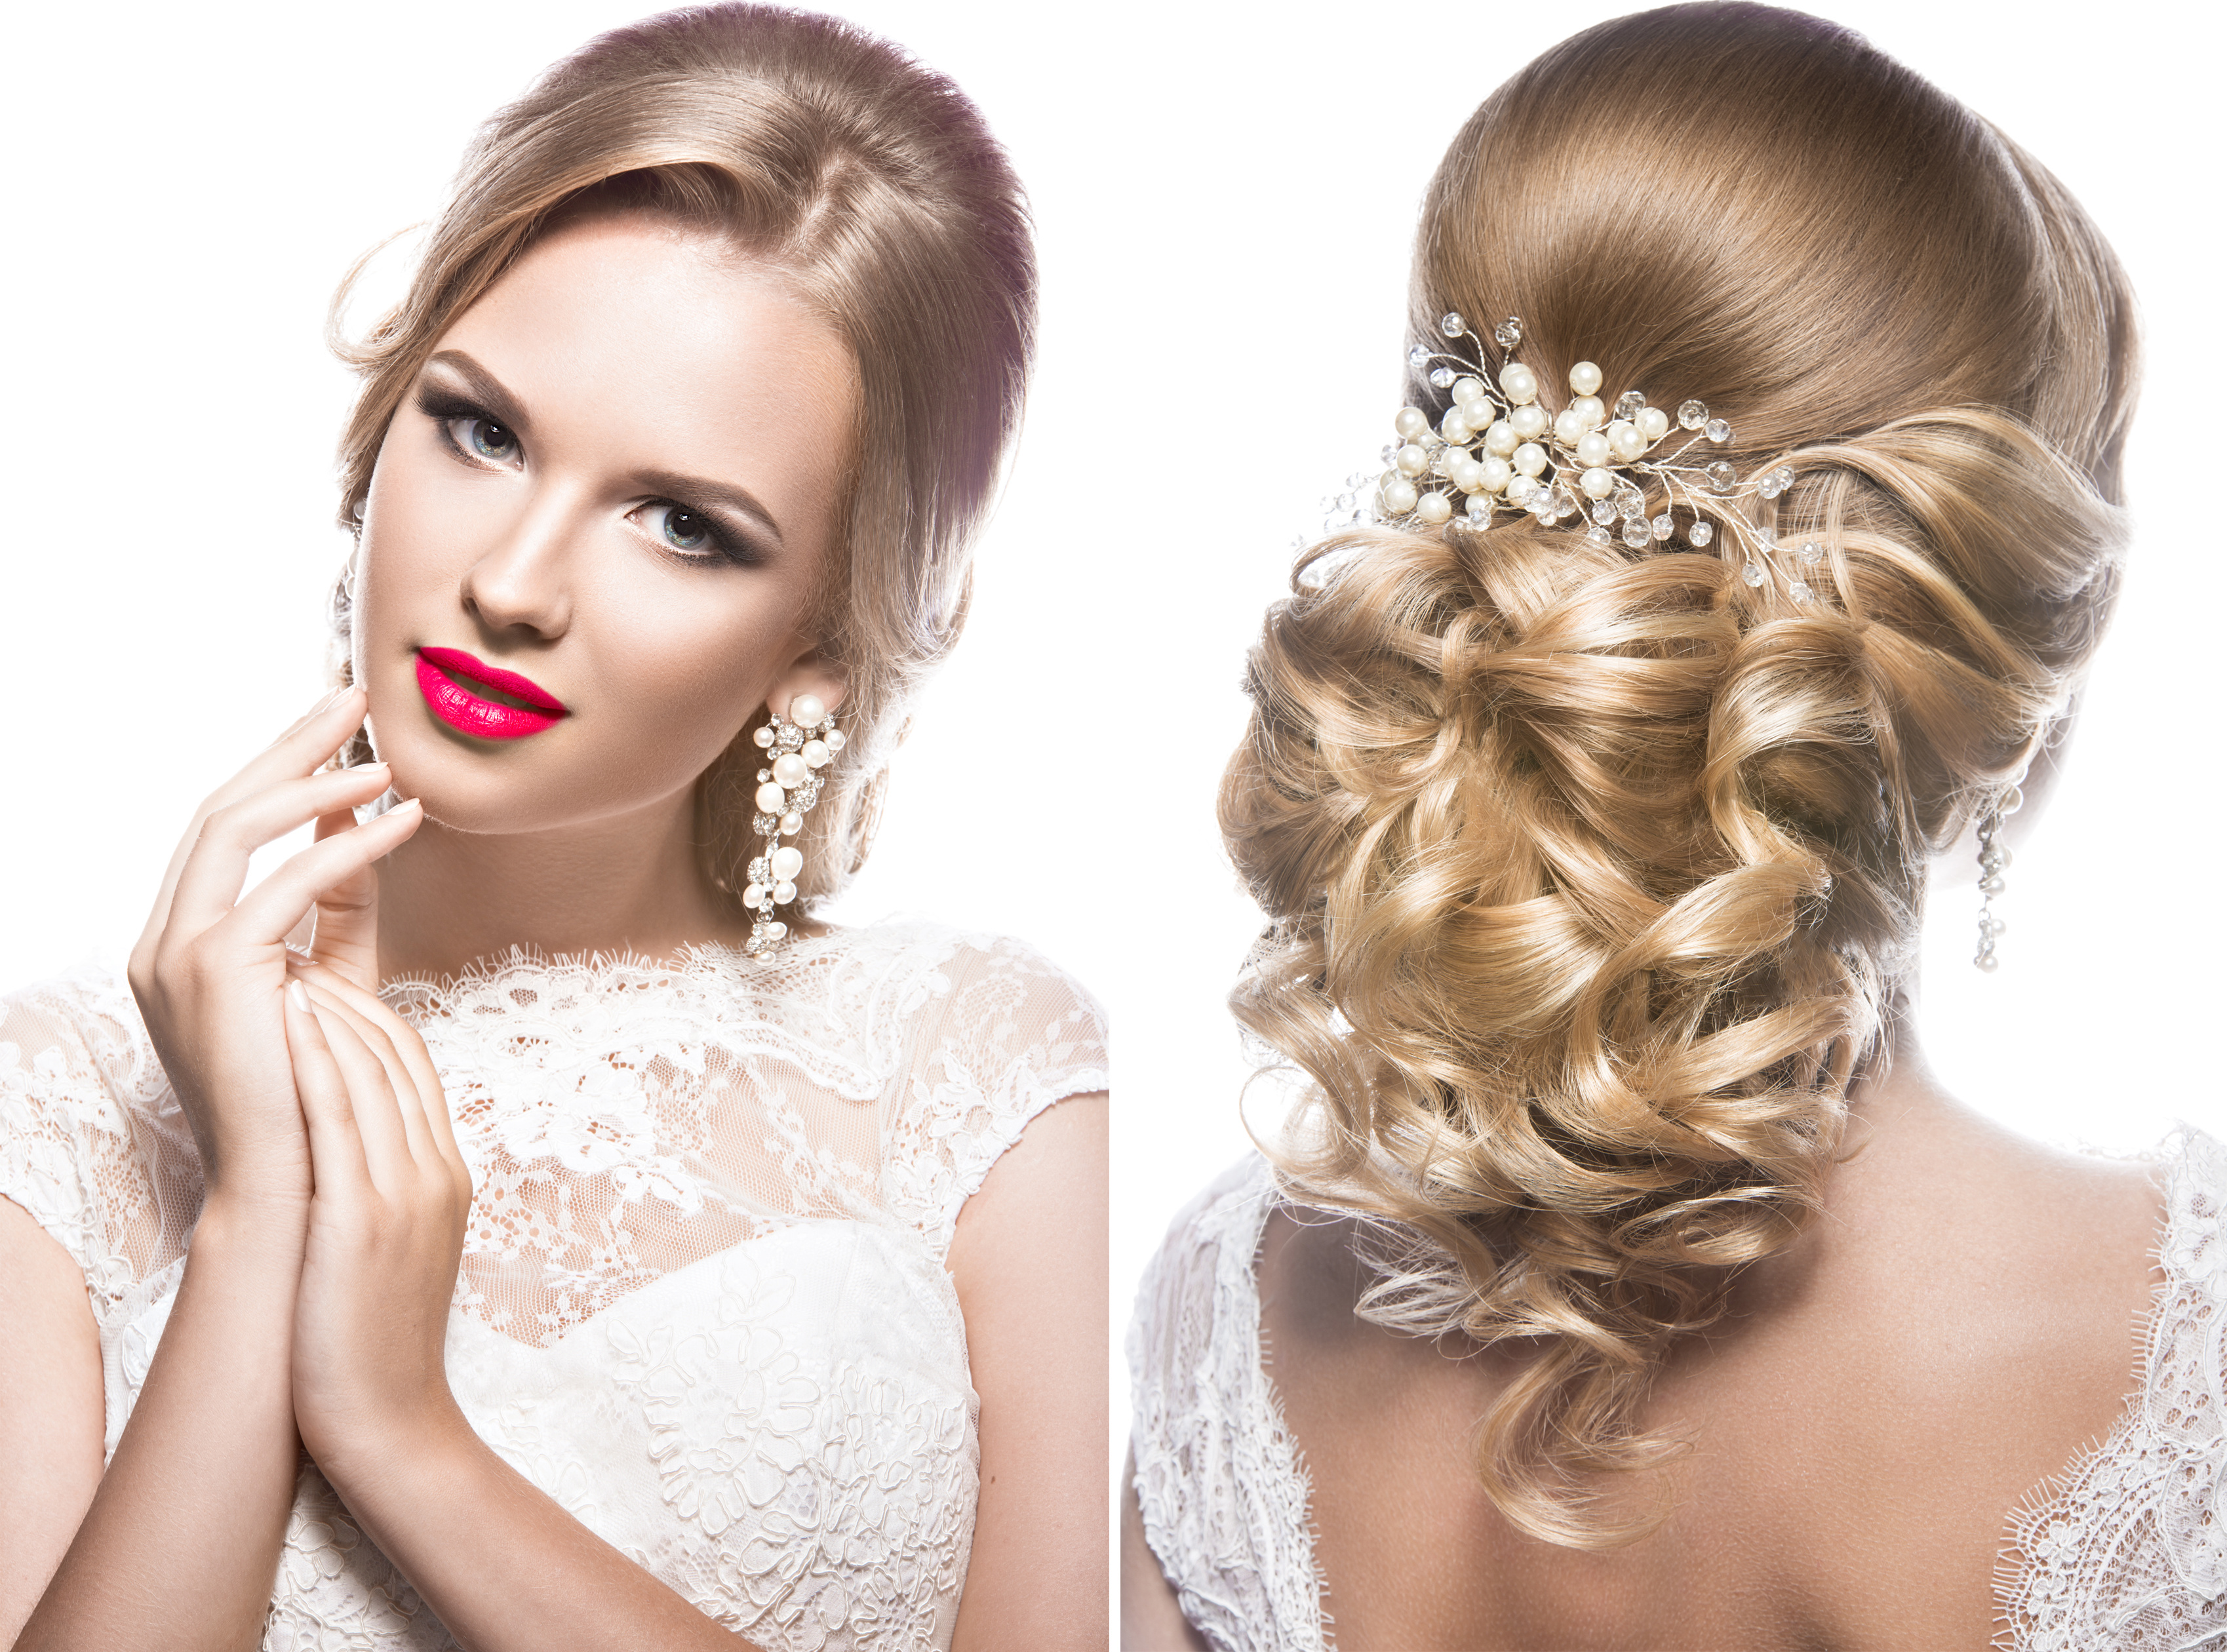 Medium Hairstyle For Round Face Wedding for Oval Face